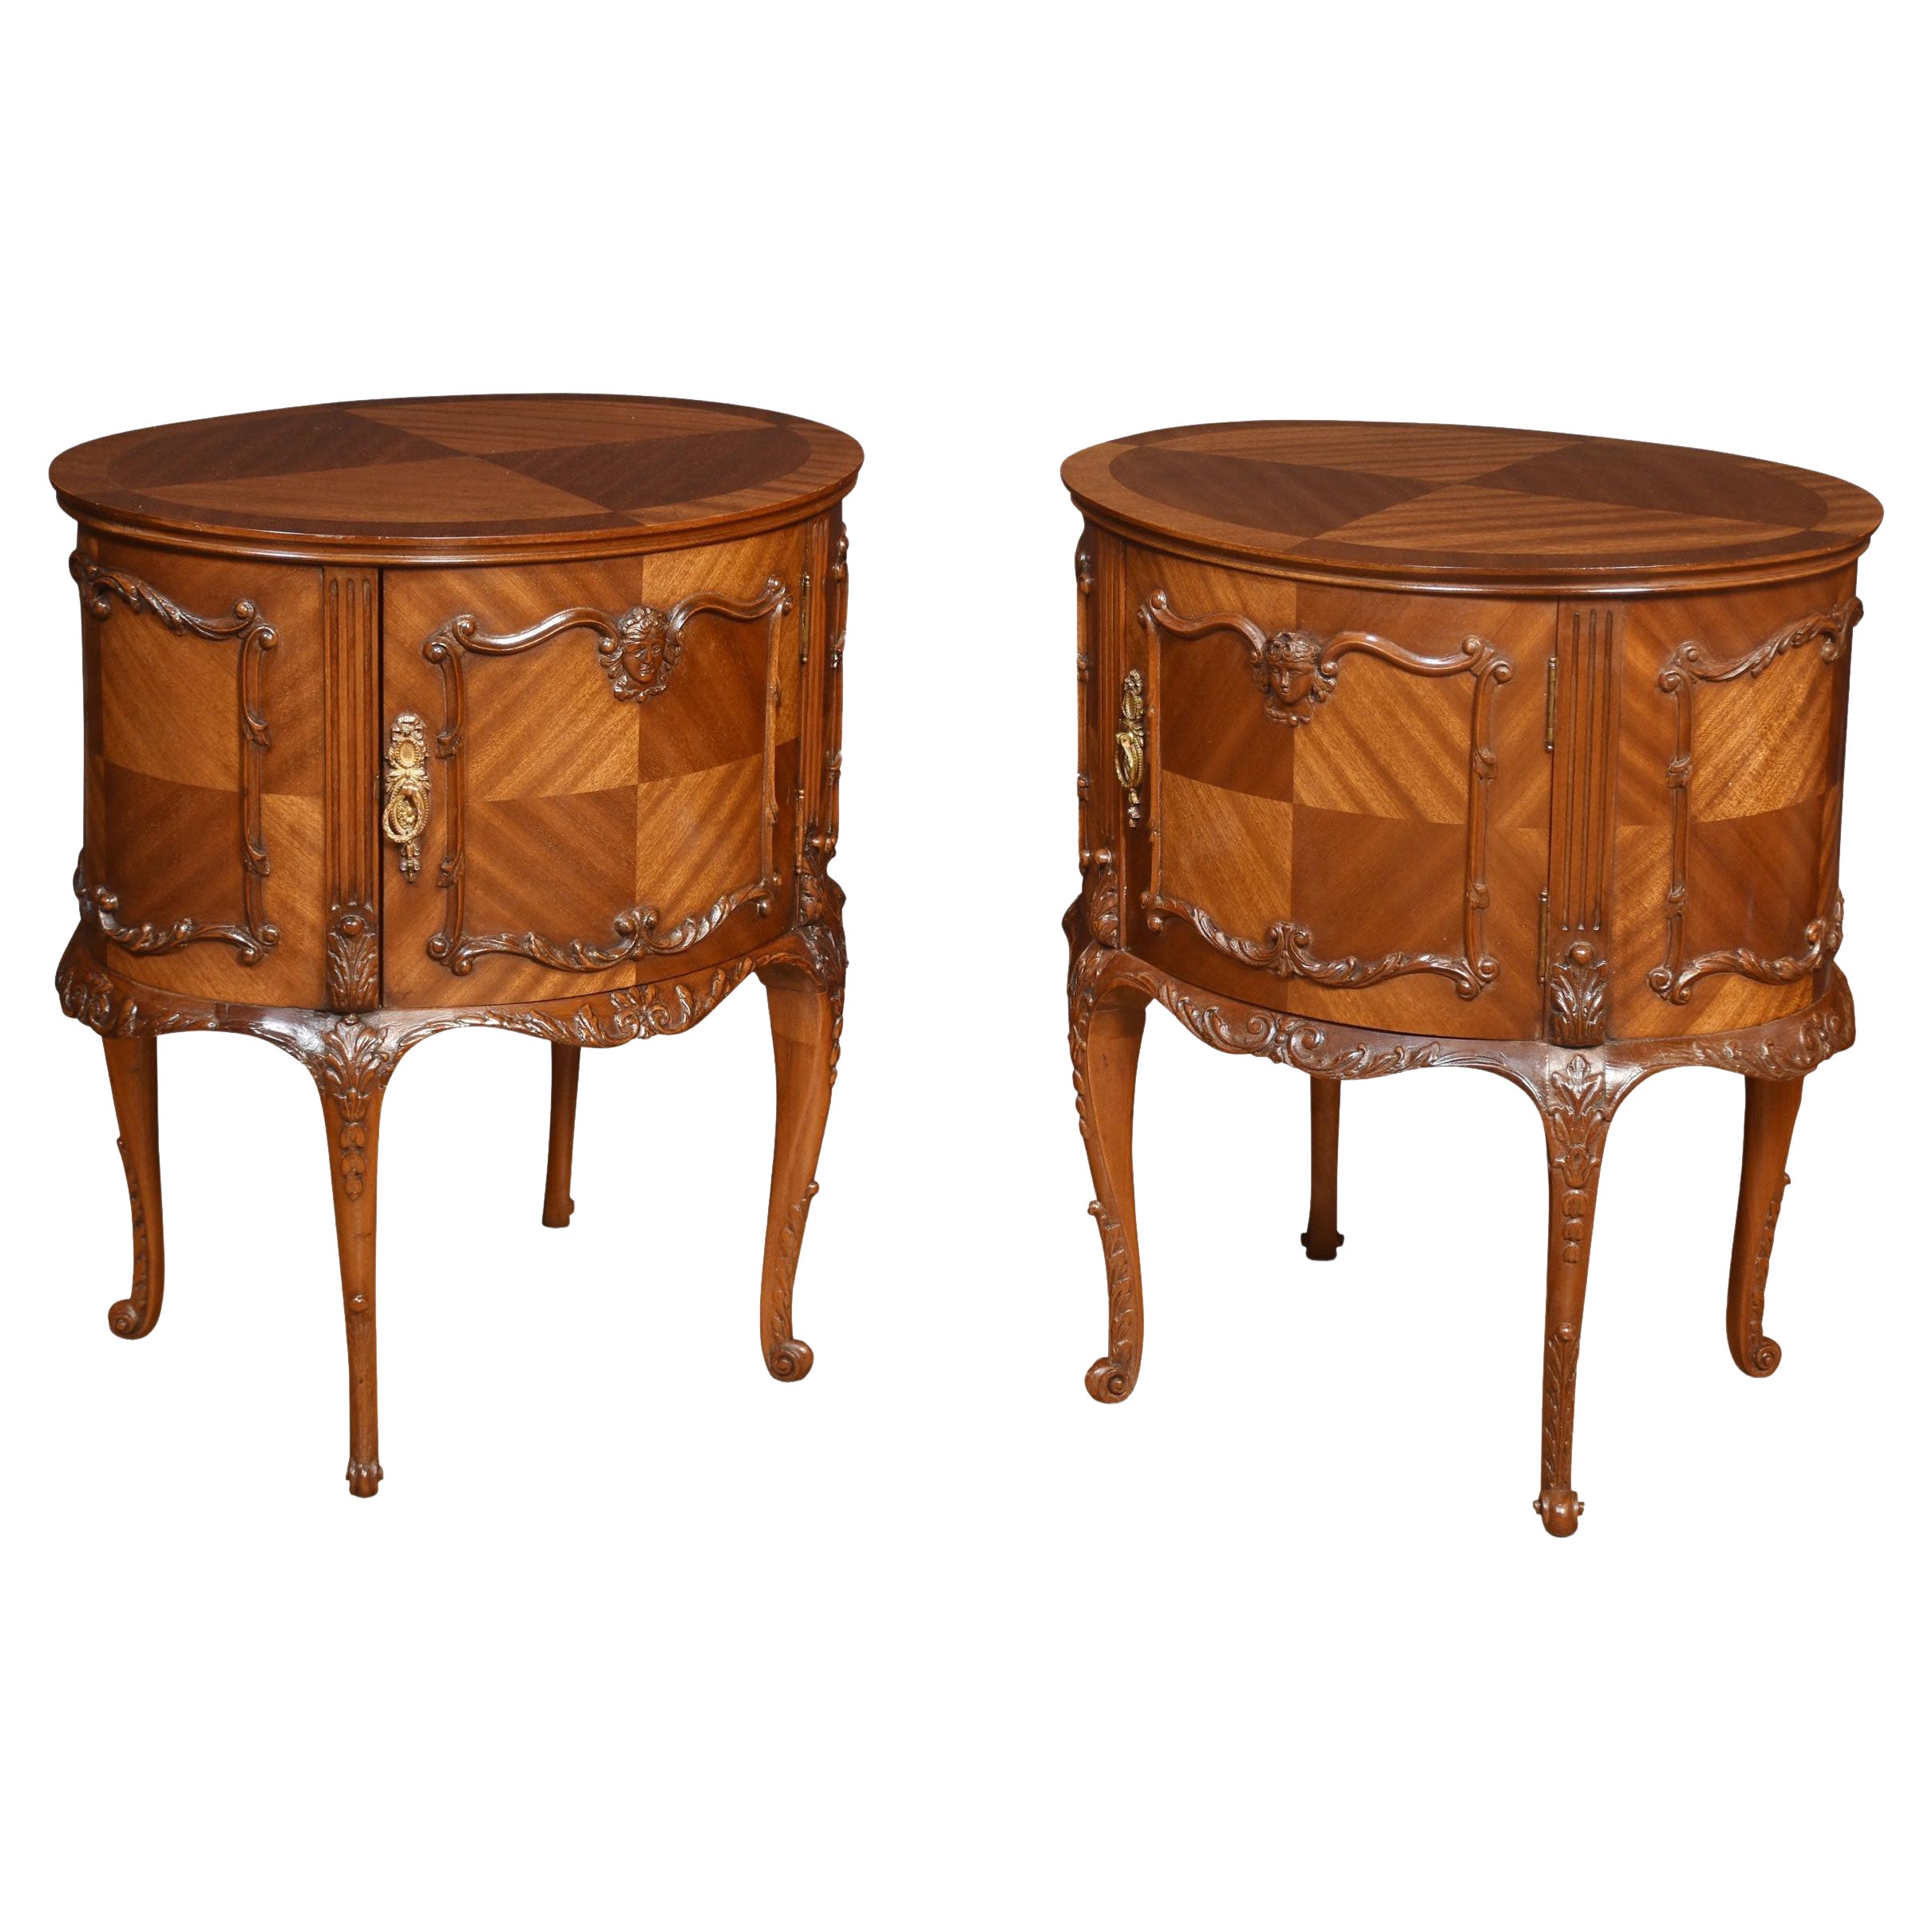 Pair of Bedside Cabinets For Sale